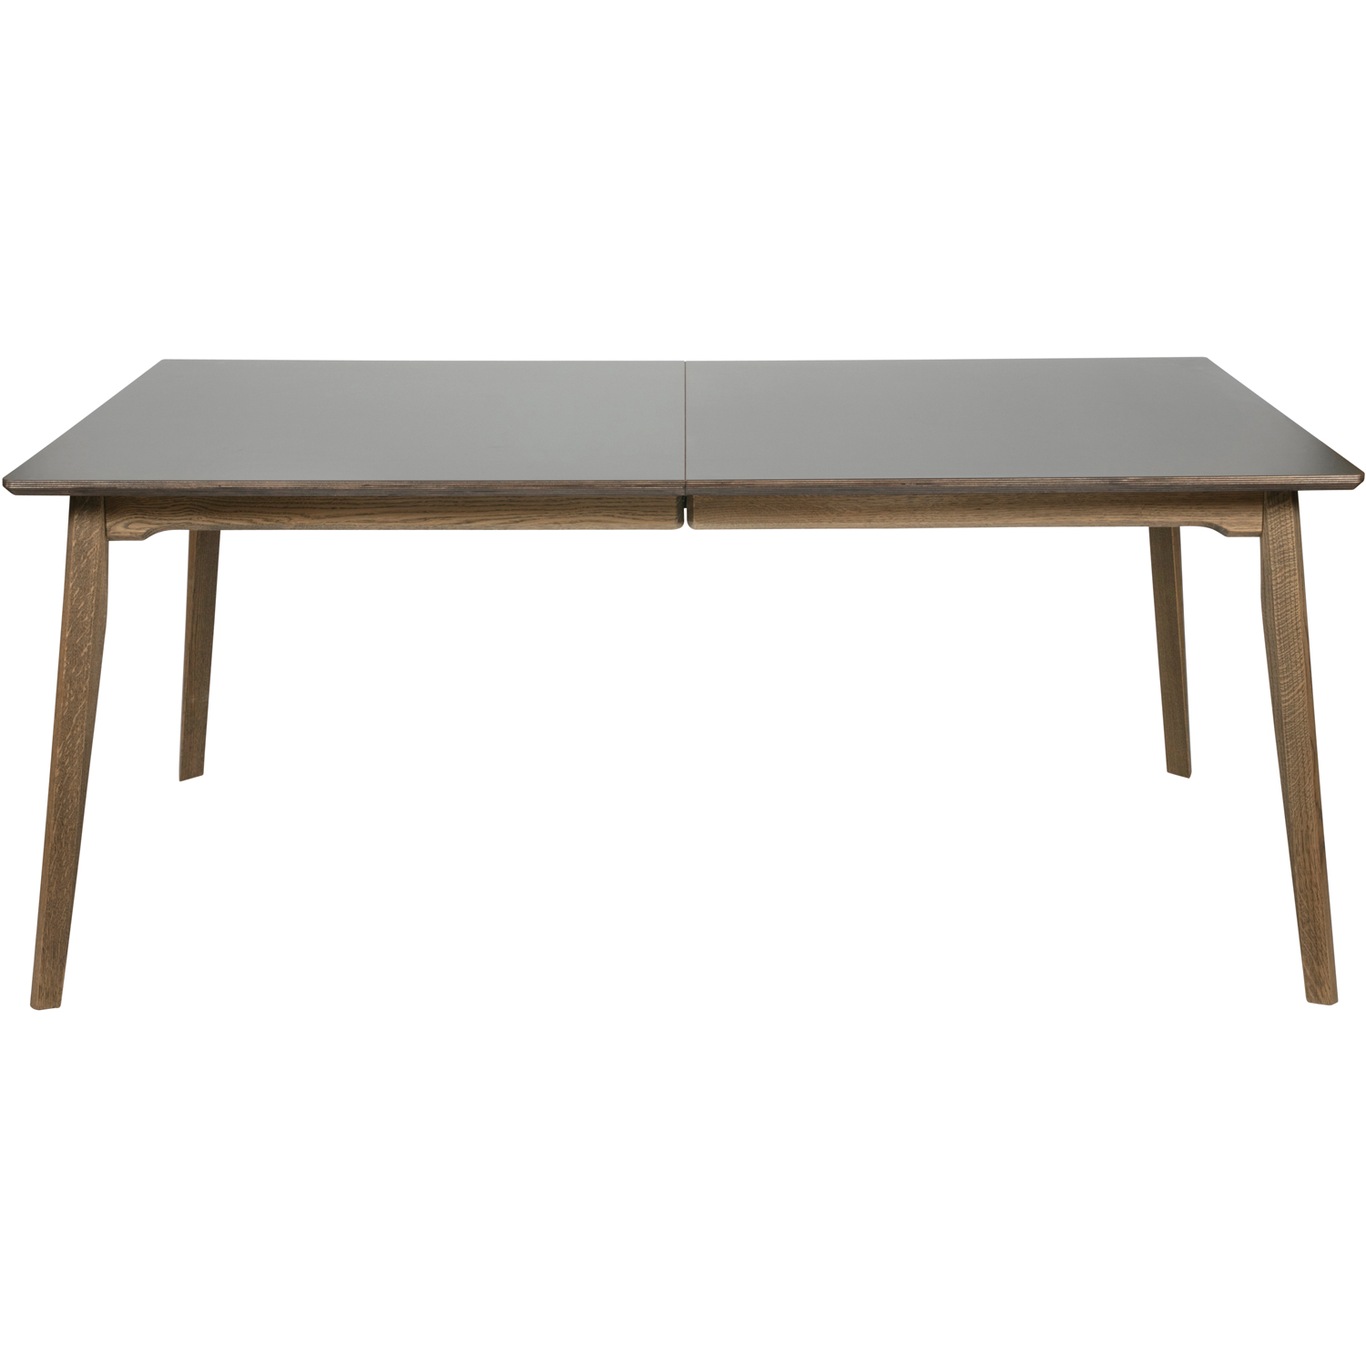 Note 90 Dining Table, Black Oiled Oak / Graphite grey Laminate